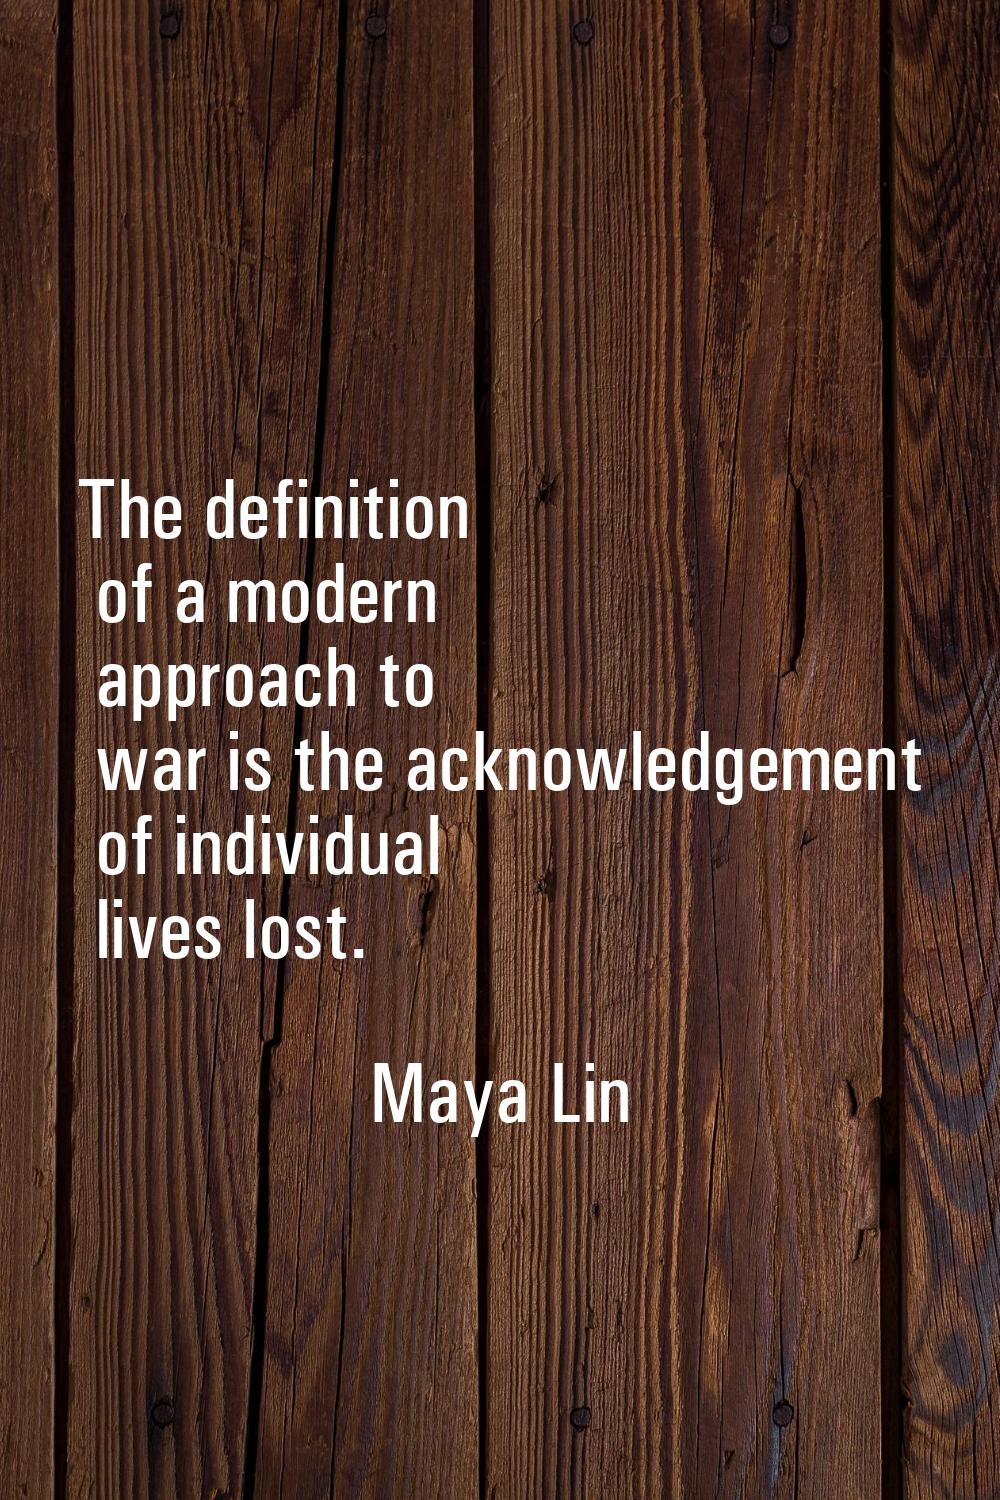 The definition of a modern approach to war is the acknowledgement of individual lives lost.